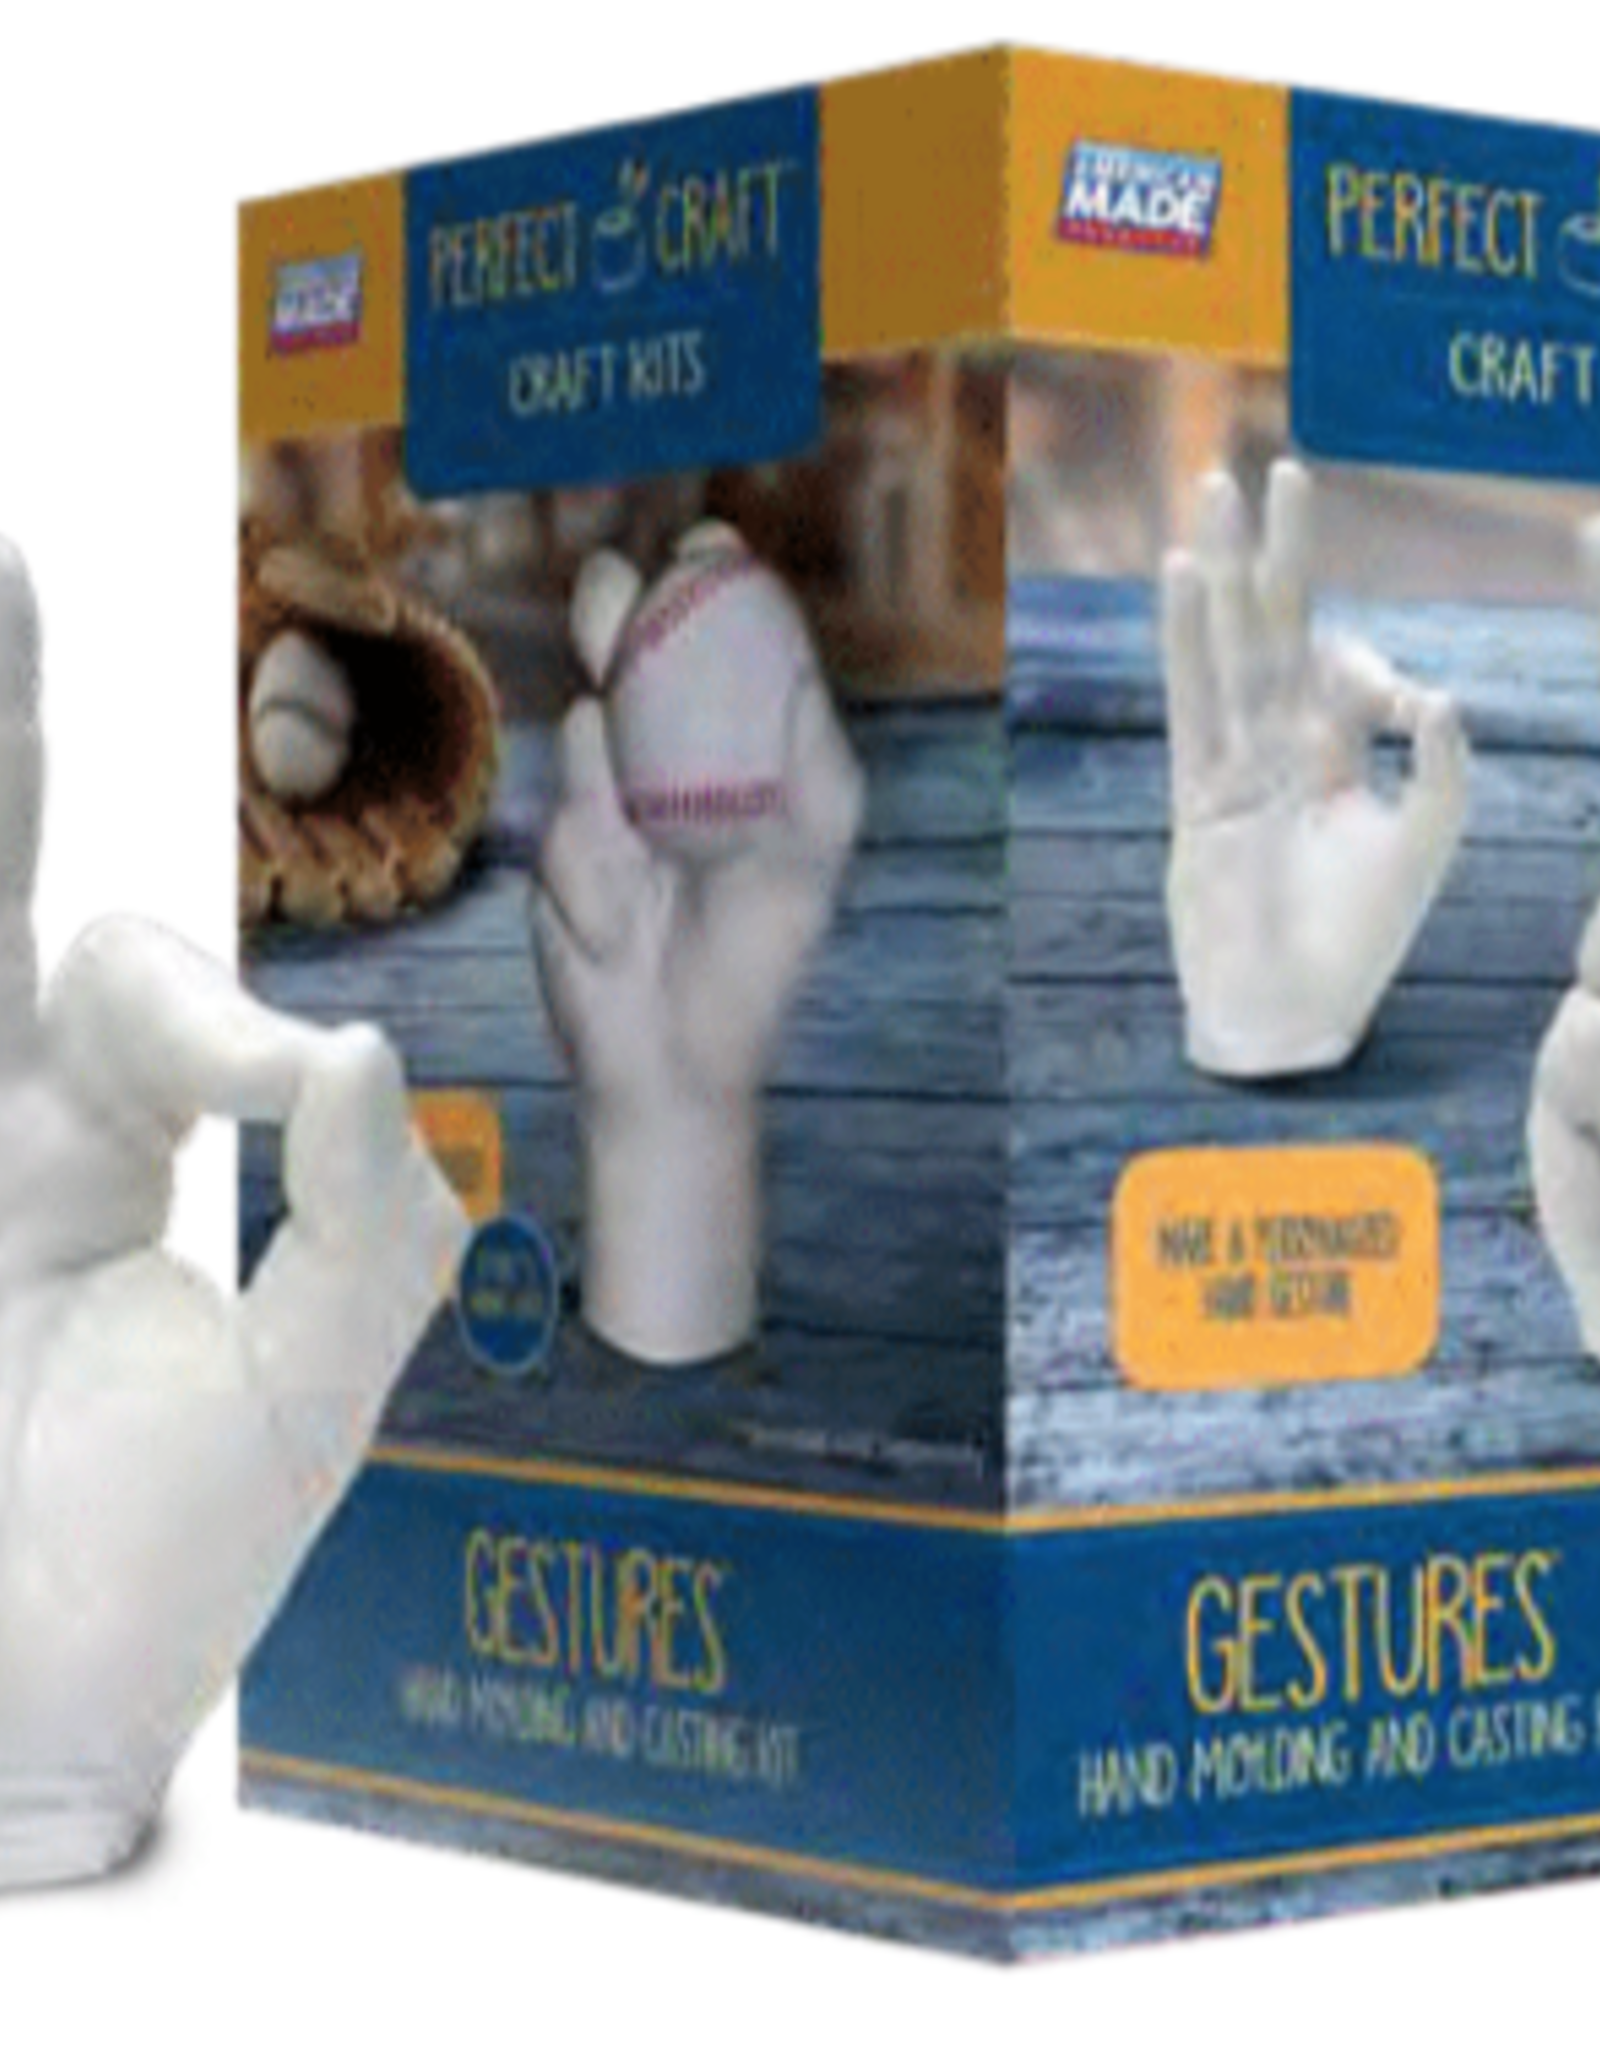 Gestures Hand Molding and Casting Kit